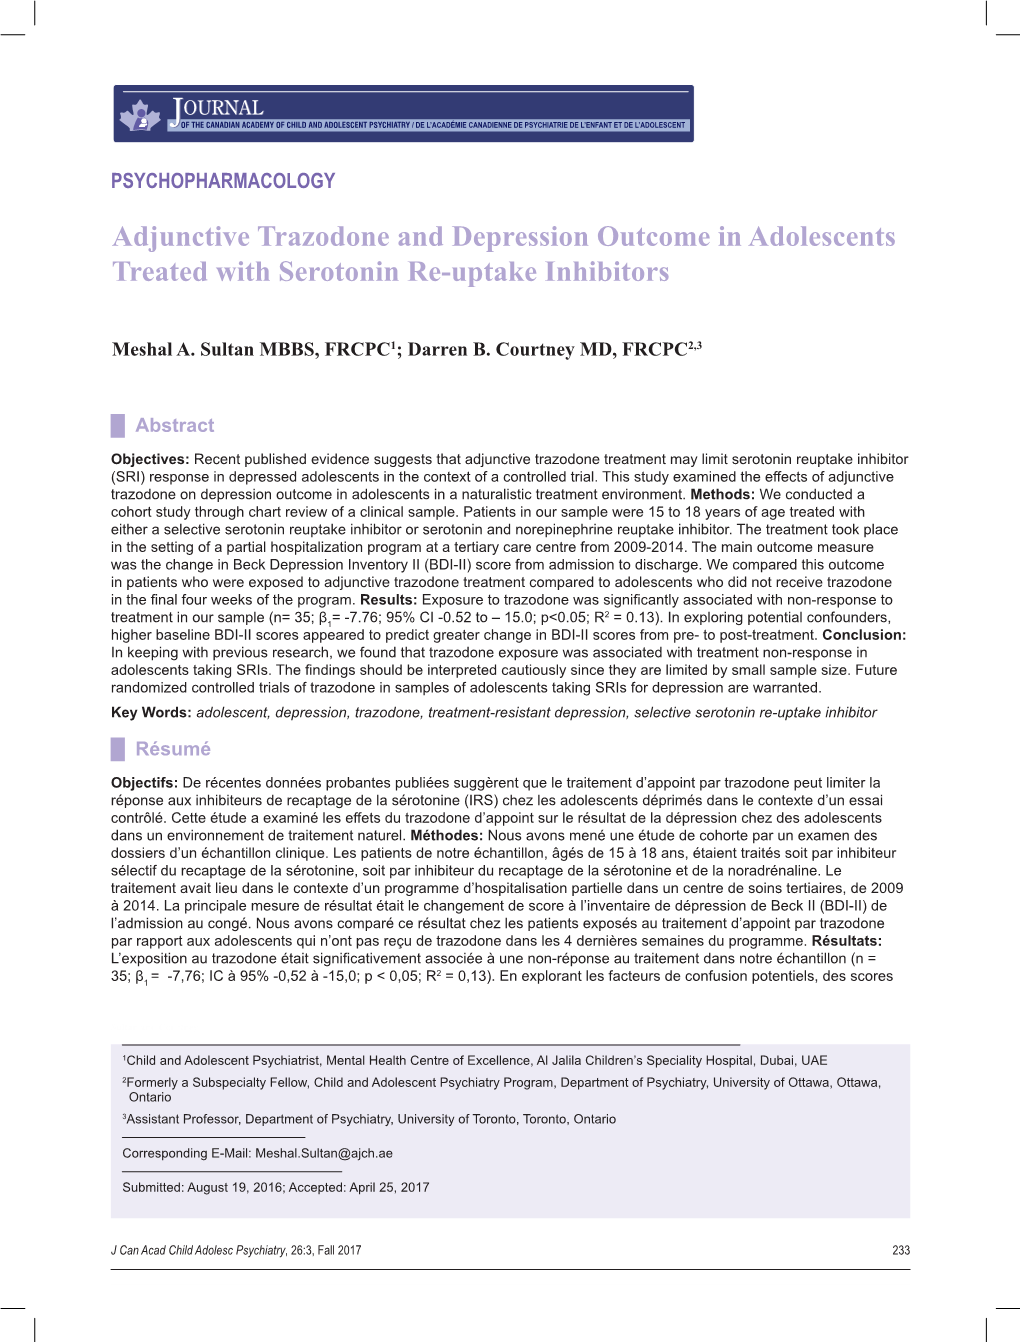 Adjunctive Trazodone and Depression Outcome in Adolescents Treated with Serotonin Re-Uptake Inhibitors